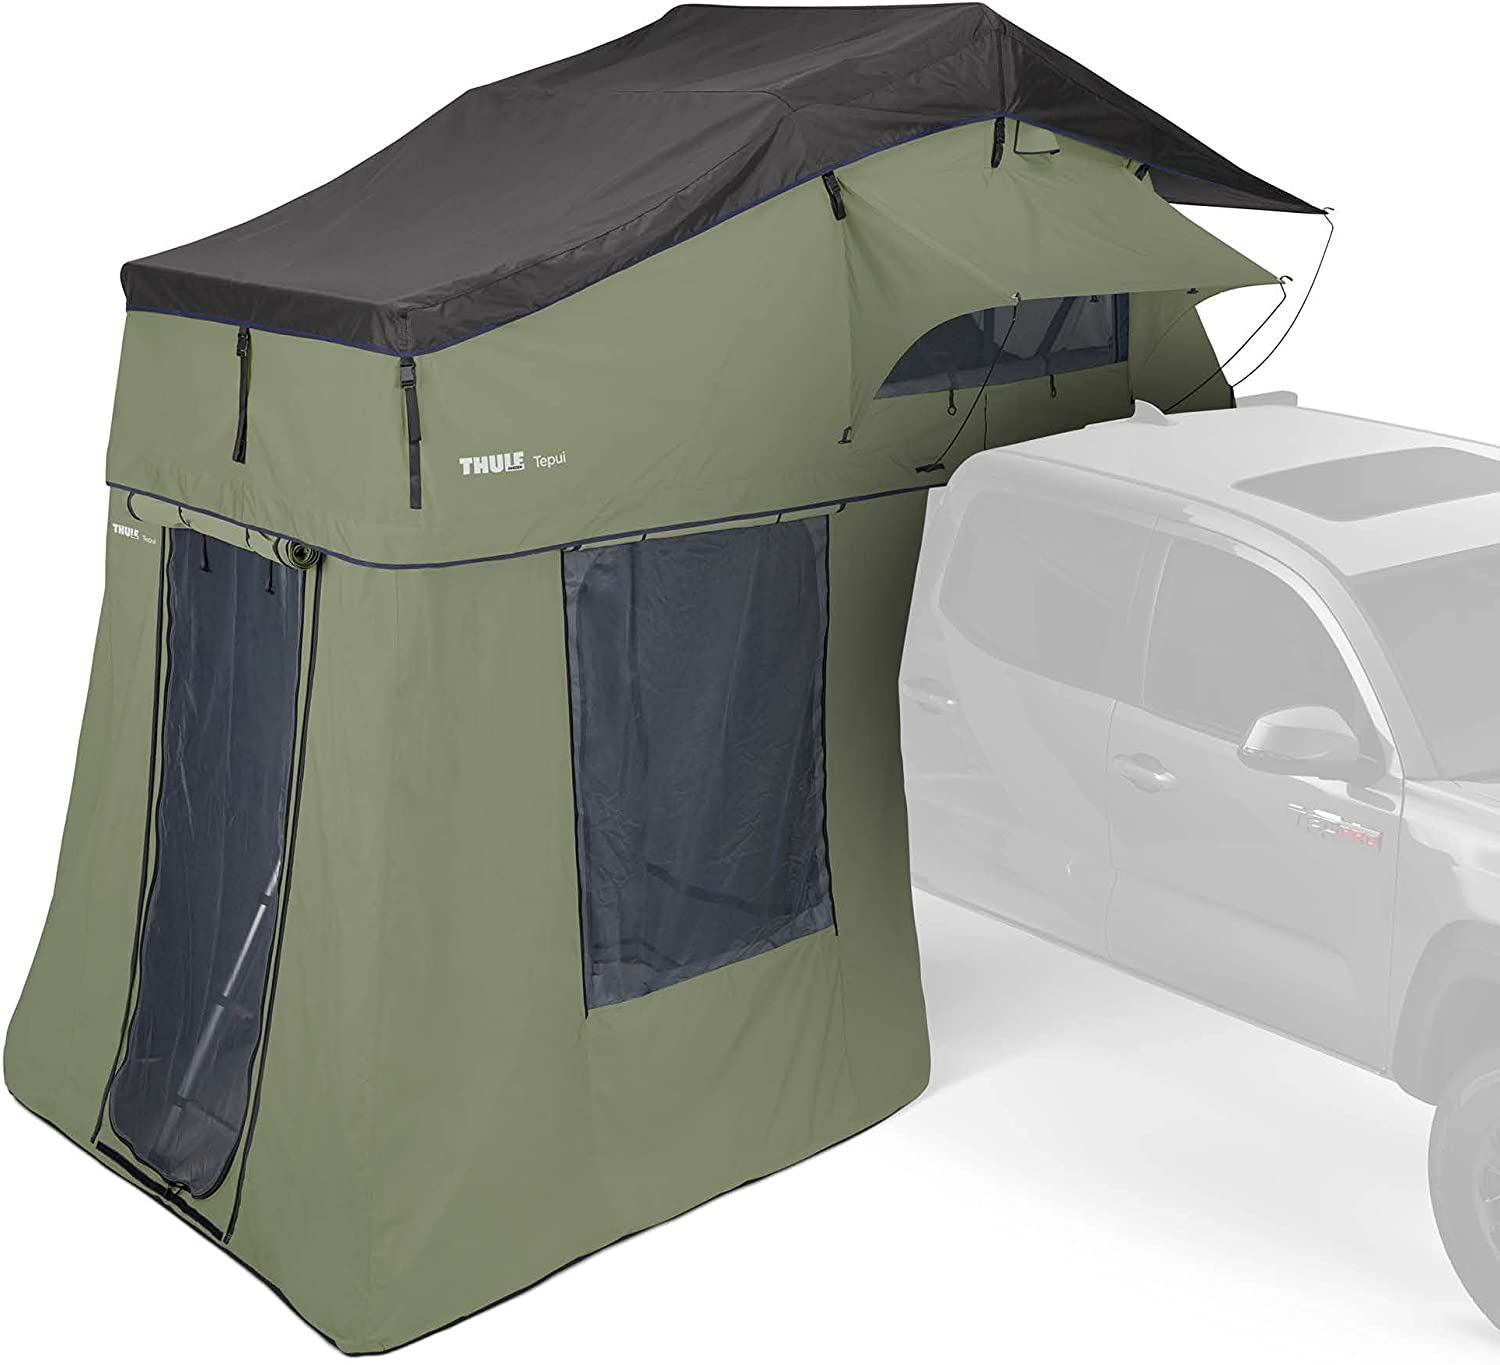 Roof top tents from Northwest Auto Accessories